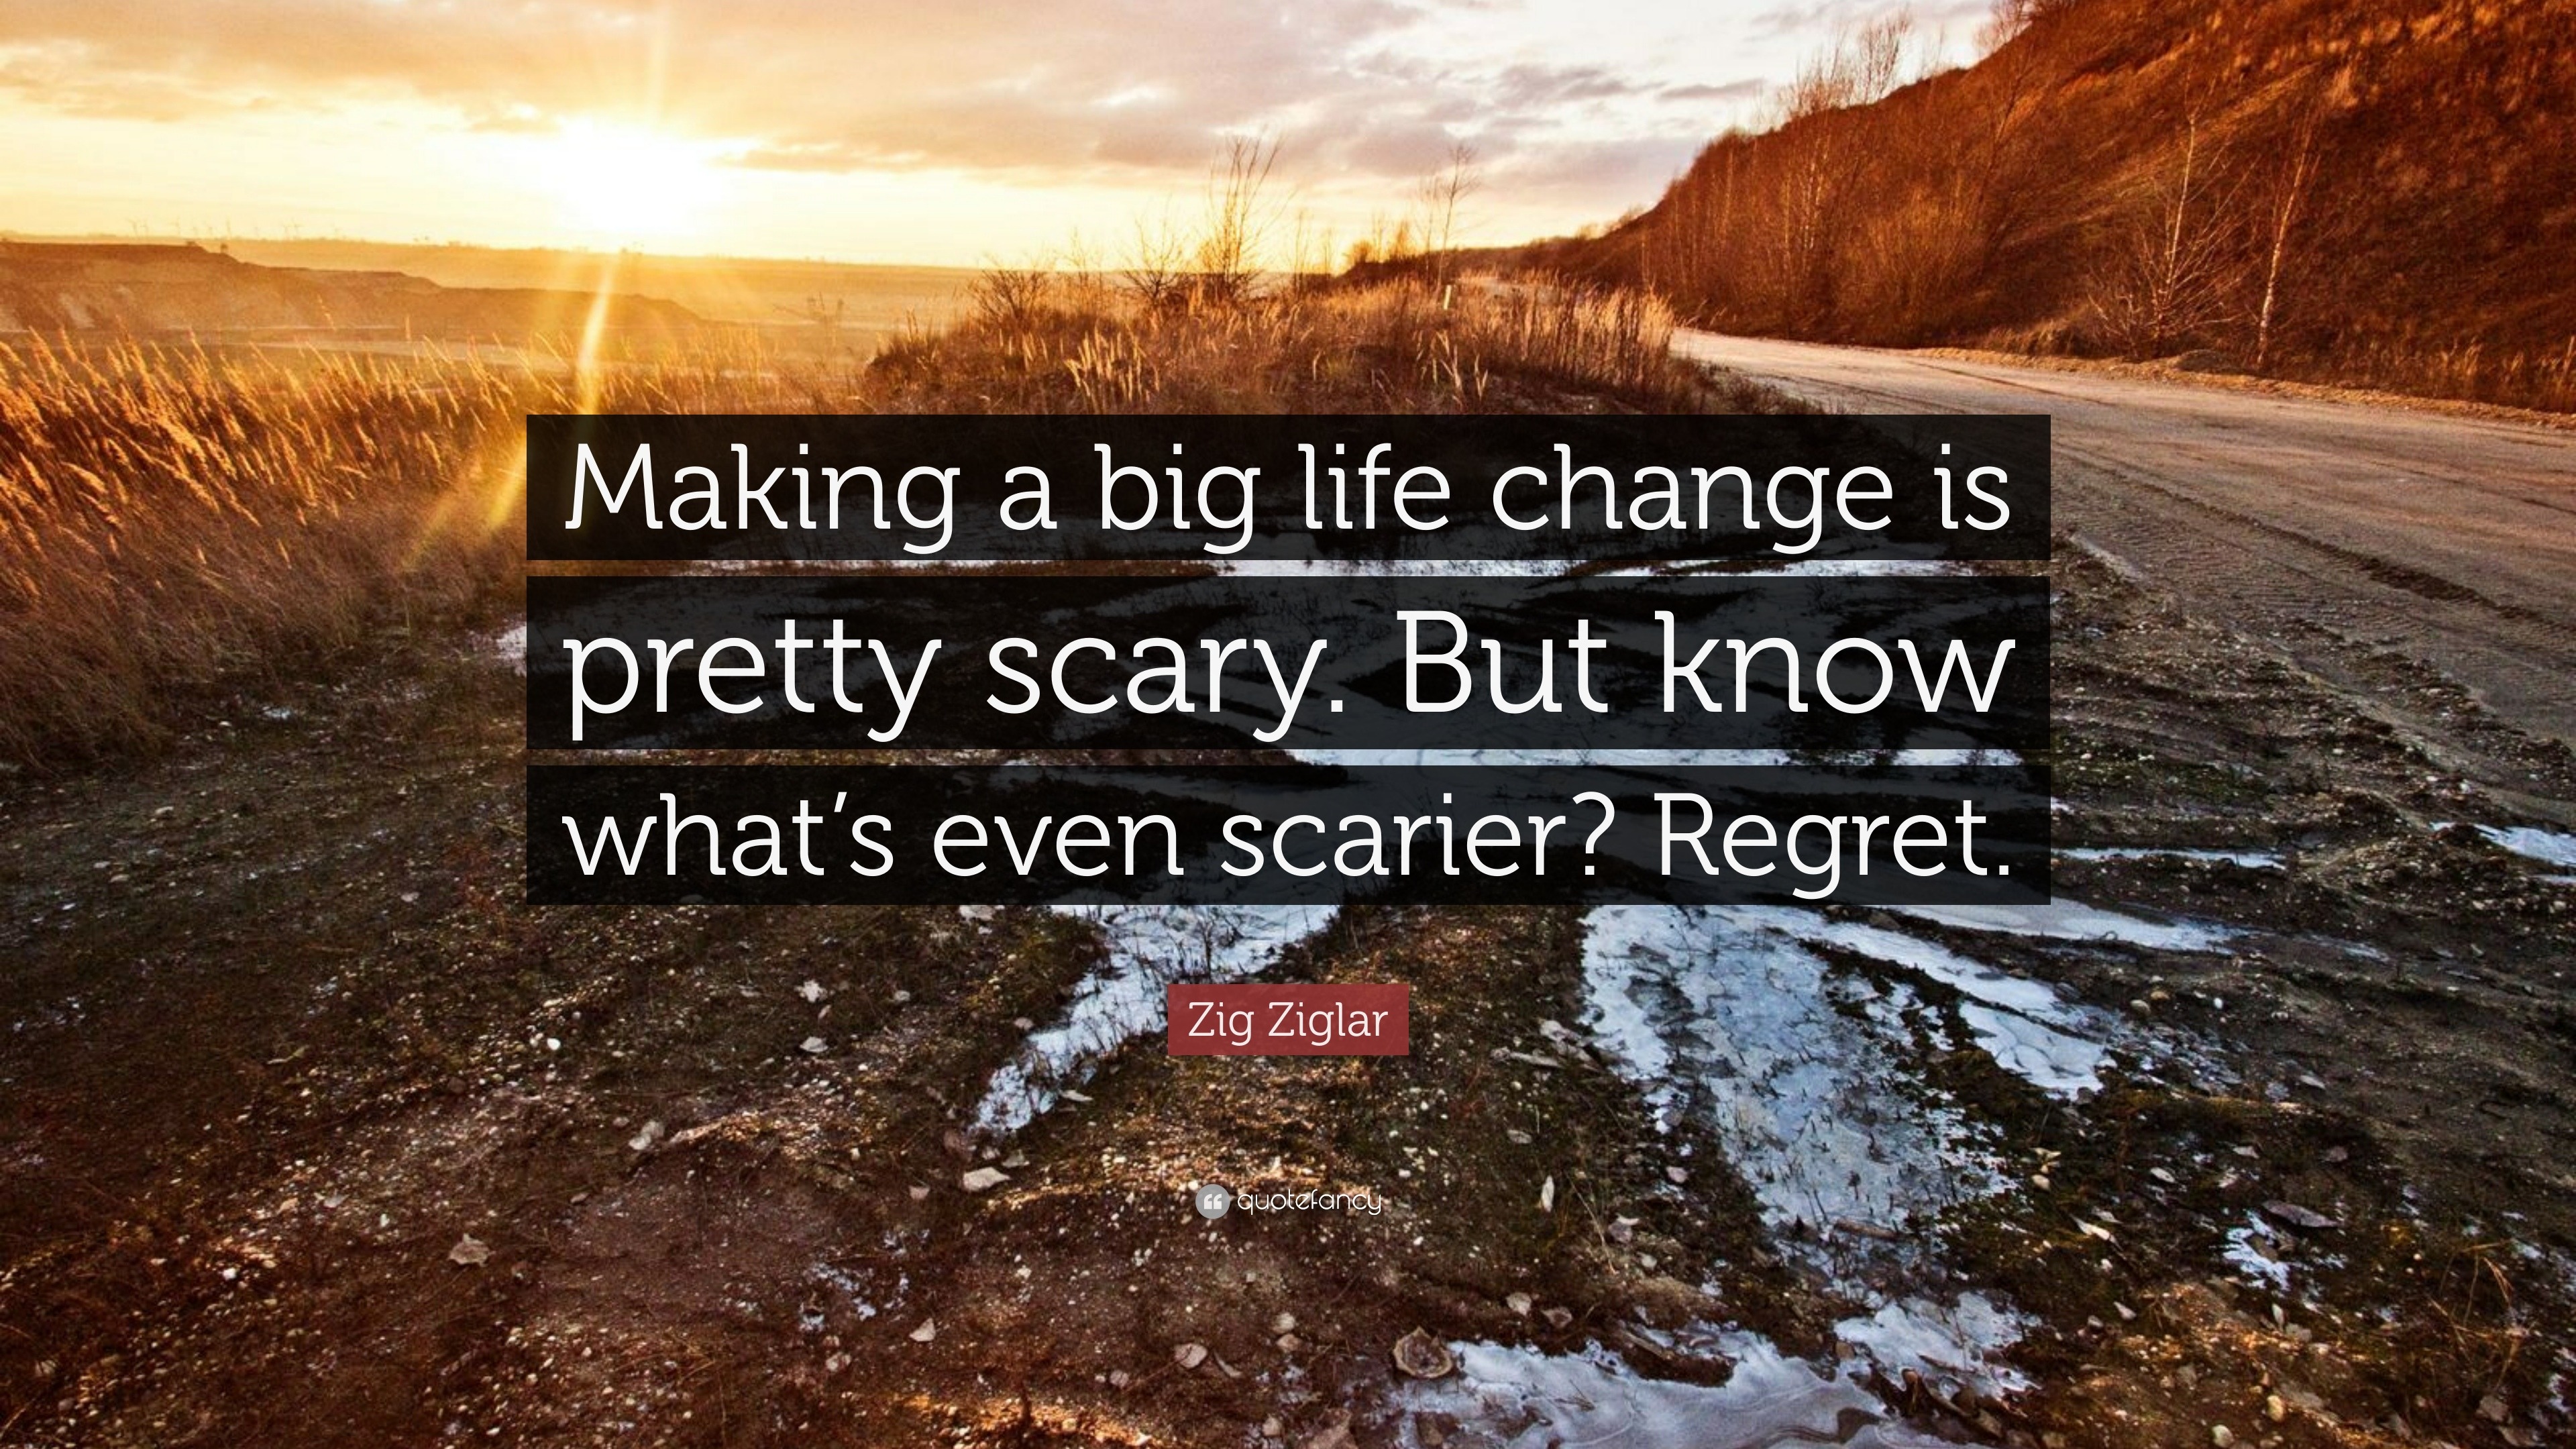 Regret Quotes “Making a big life change is pretty scary But know what s